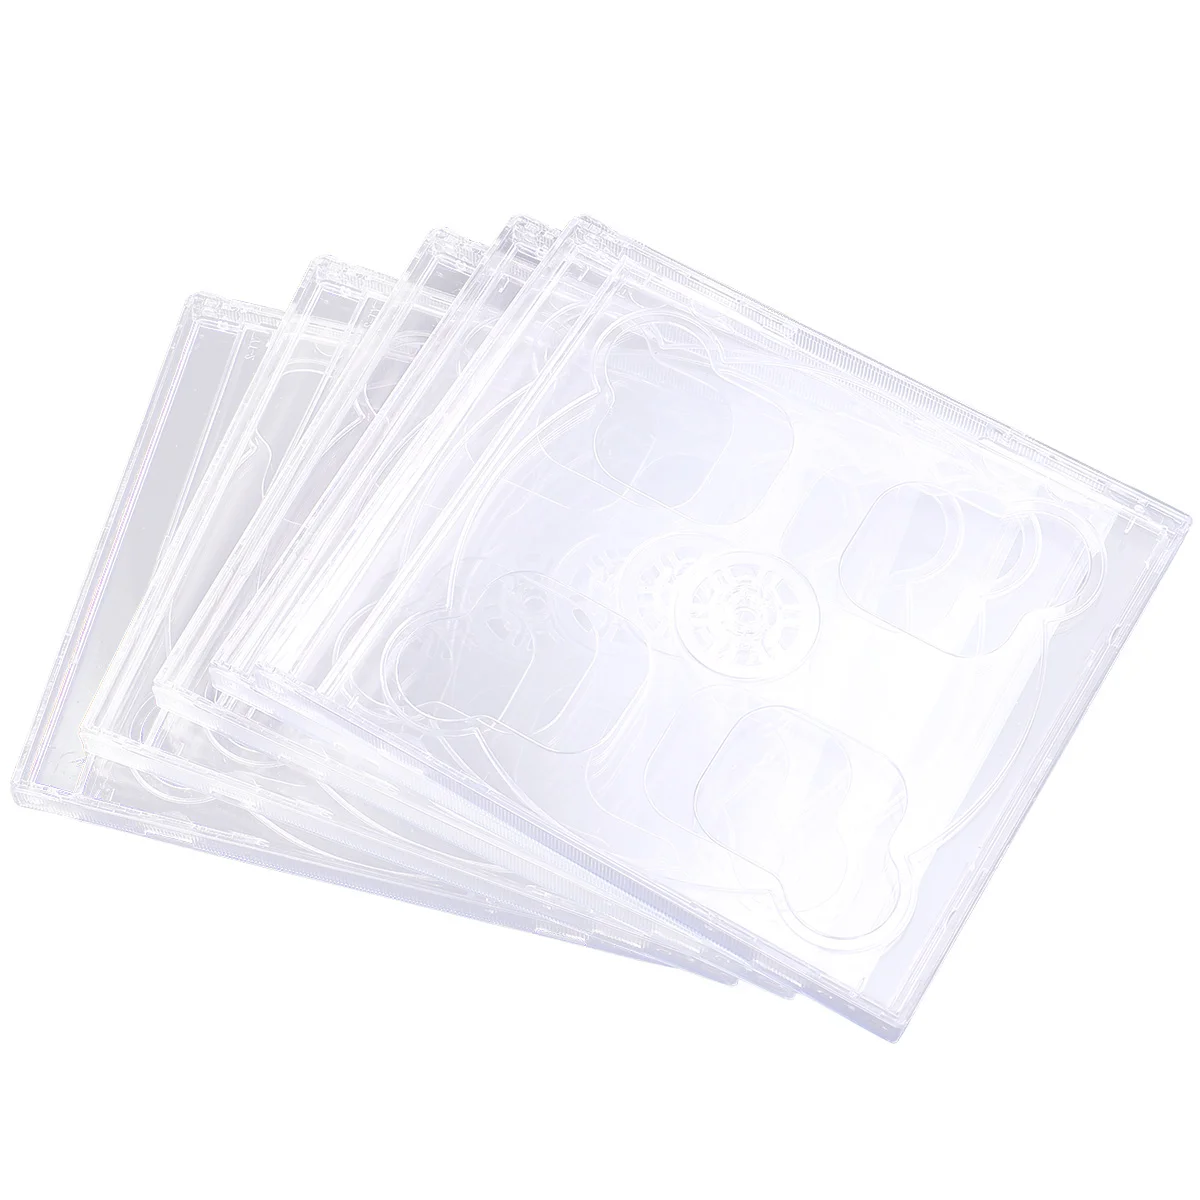 

5pcs Dual CD Jewel Case with Assembled Clear Tray Standard Empty Clear Replacement DVD Case Portable CD Package Case